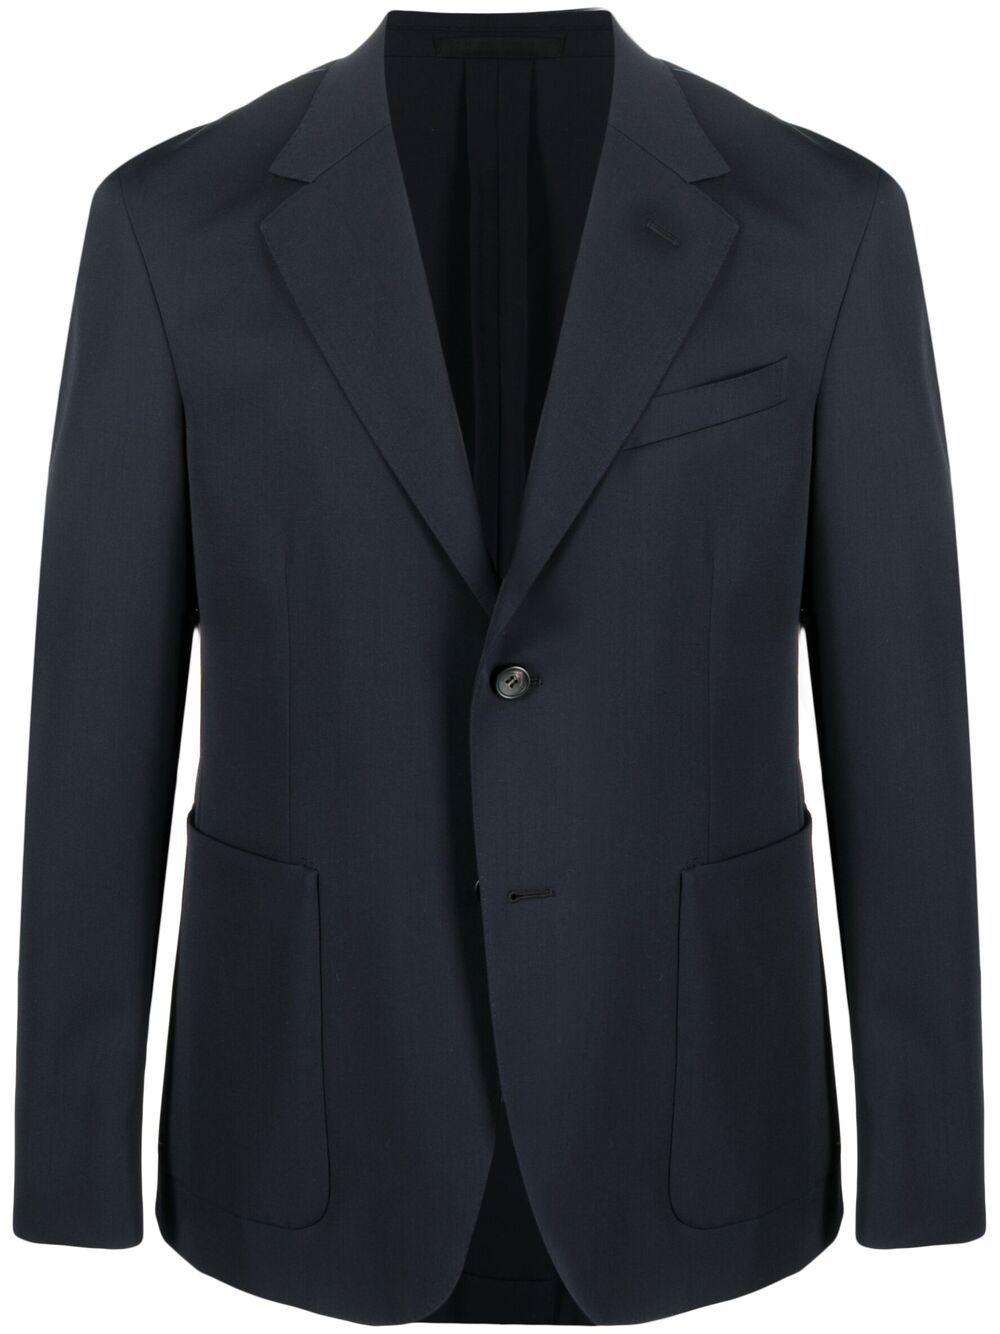 LANVIN SINGLE-BREASTED SUIT JACKET